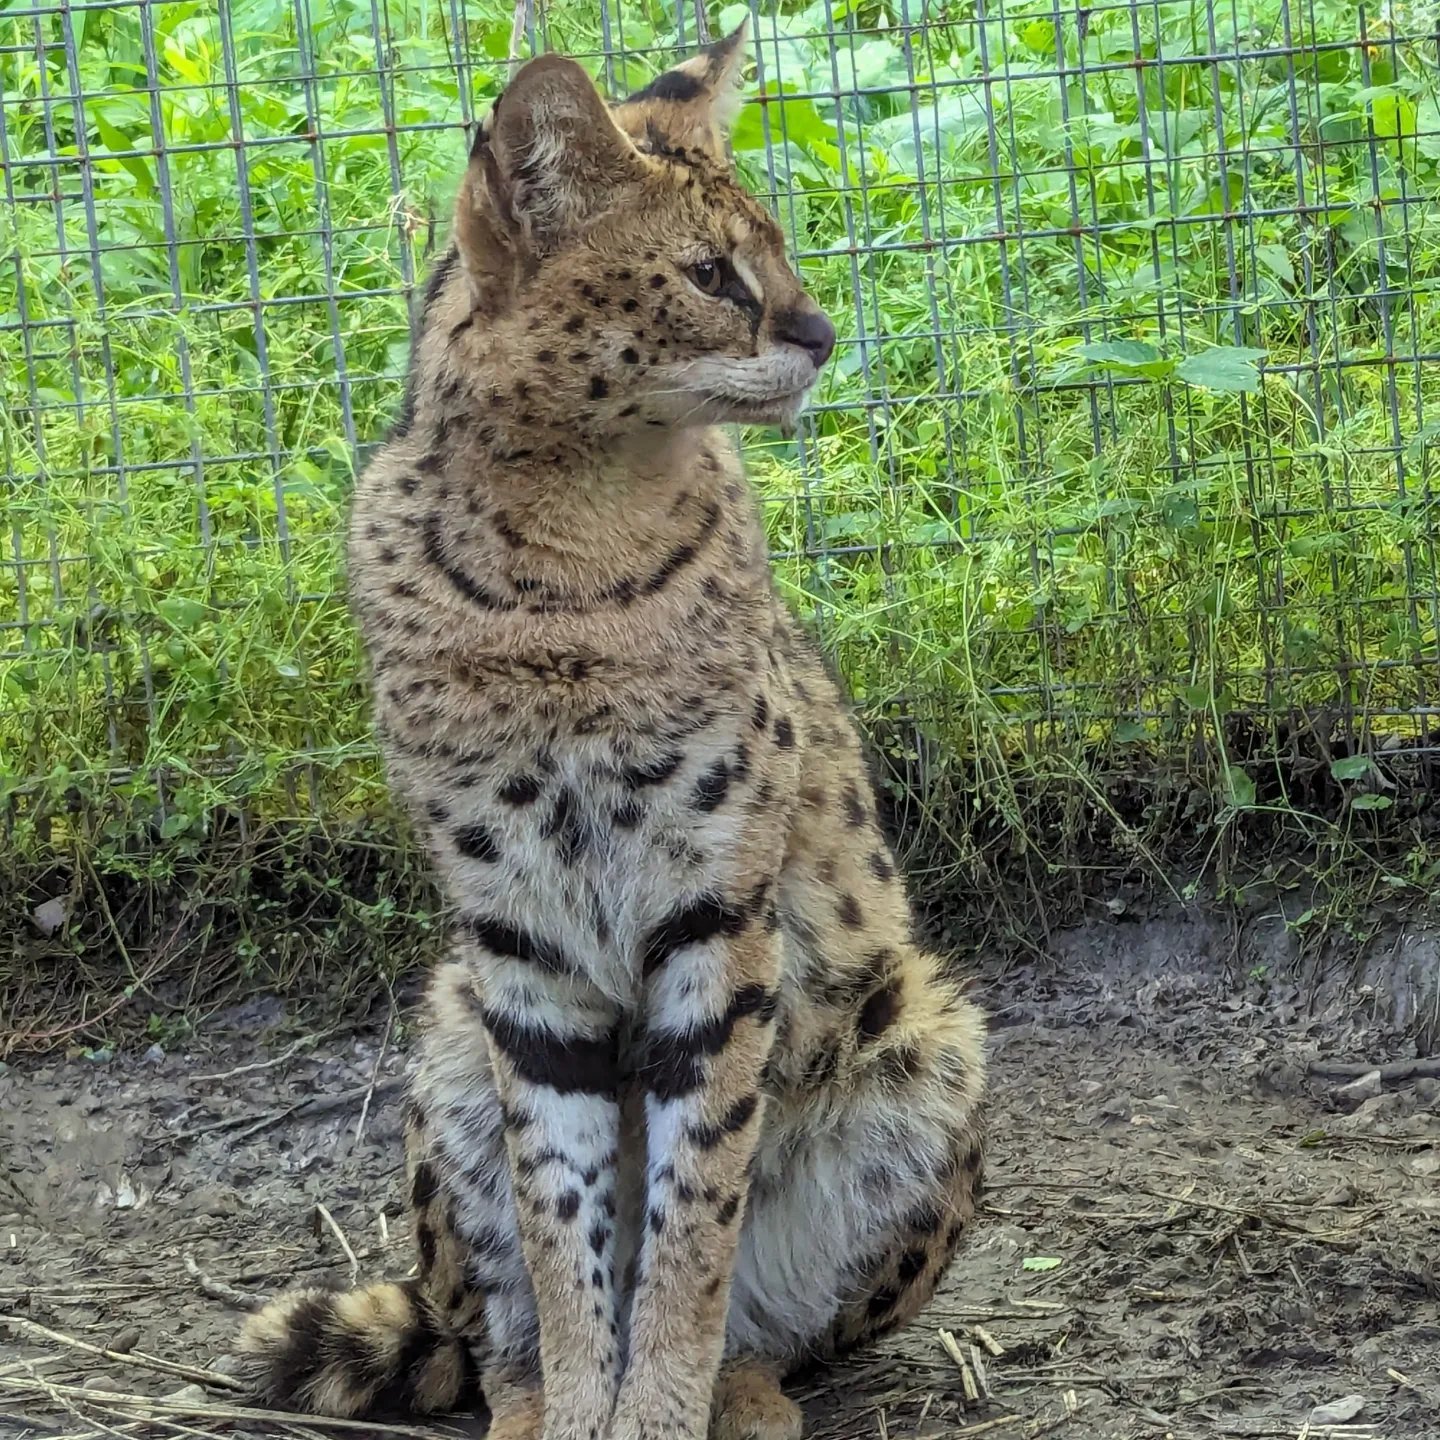 Owen knows how to pose with his good side!

#efrc #servals #PicturePerfect